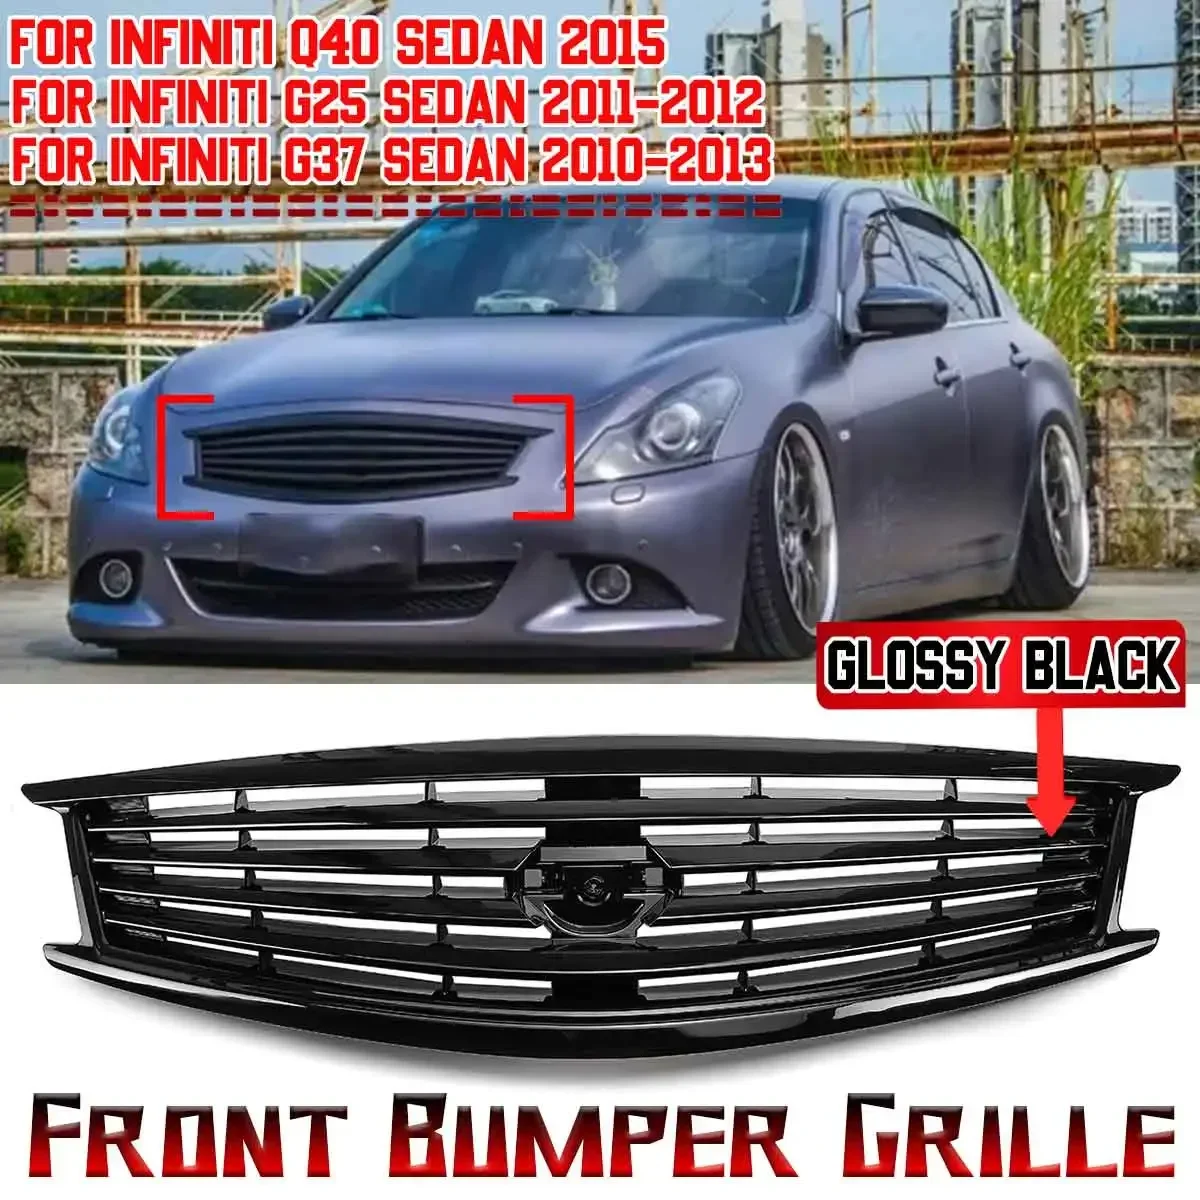 

High Quality Car Front Grill Grille Front Bumper Grille For Infiniti G37 2010-2013 G25 2011-2012 Q40 2015 4-Door Sedan Body Kit